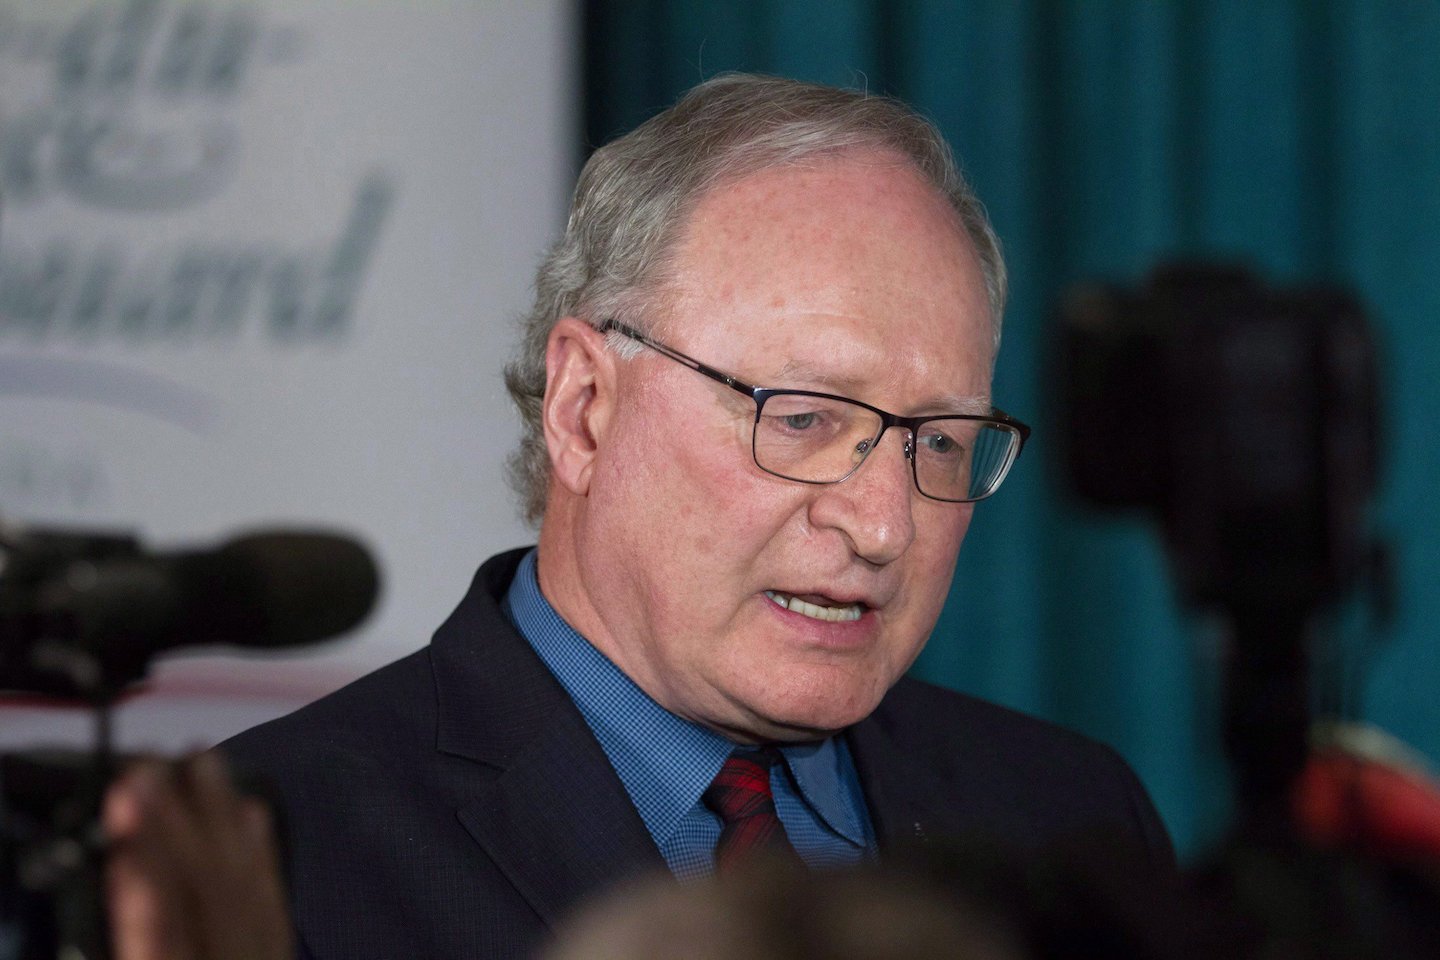 PEI abortion access-Prince Edward Island Premier Wade MacLauchlan speaking into a microphone